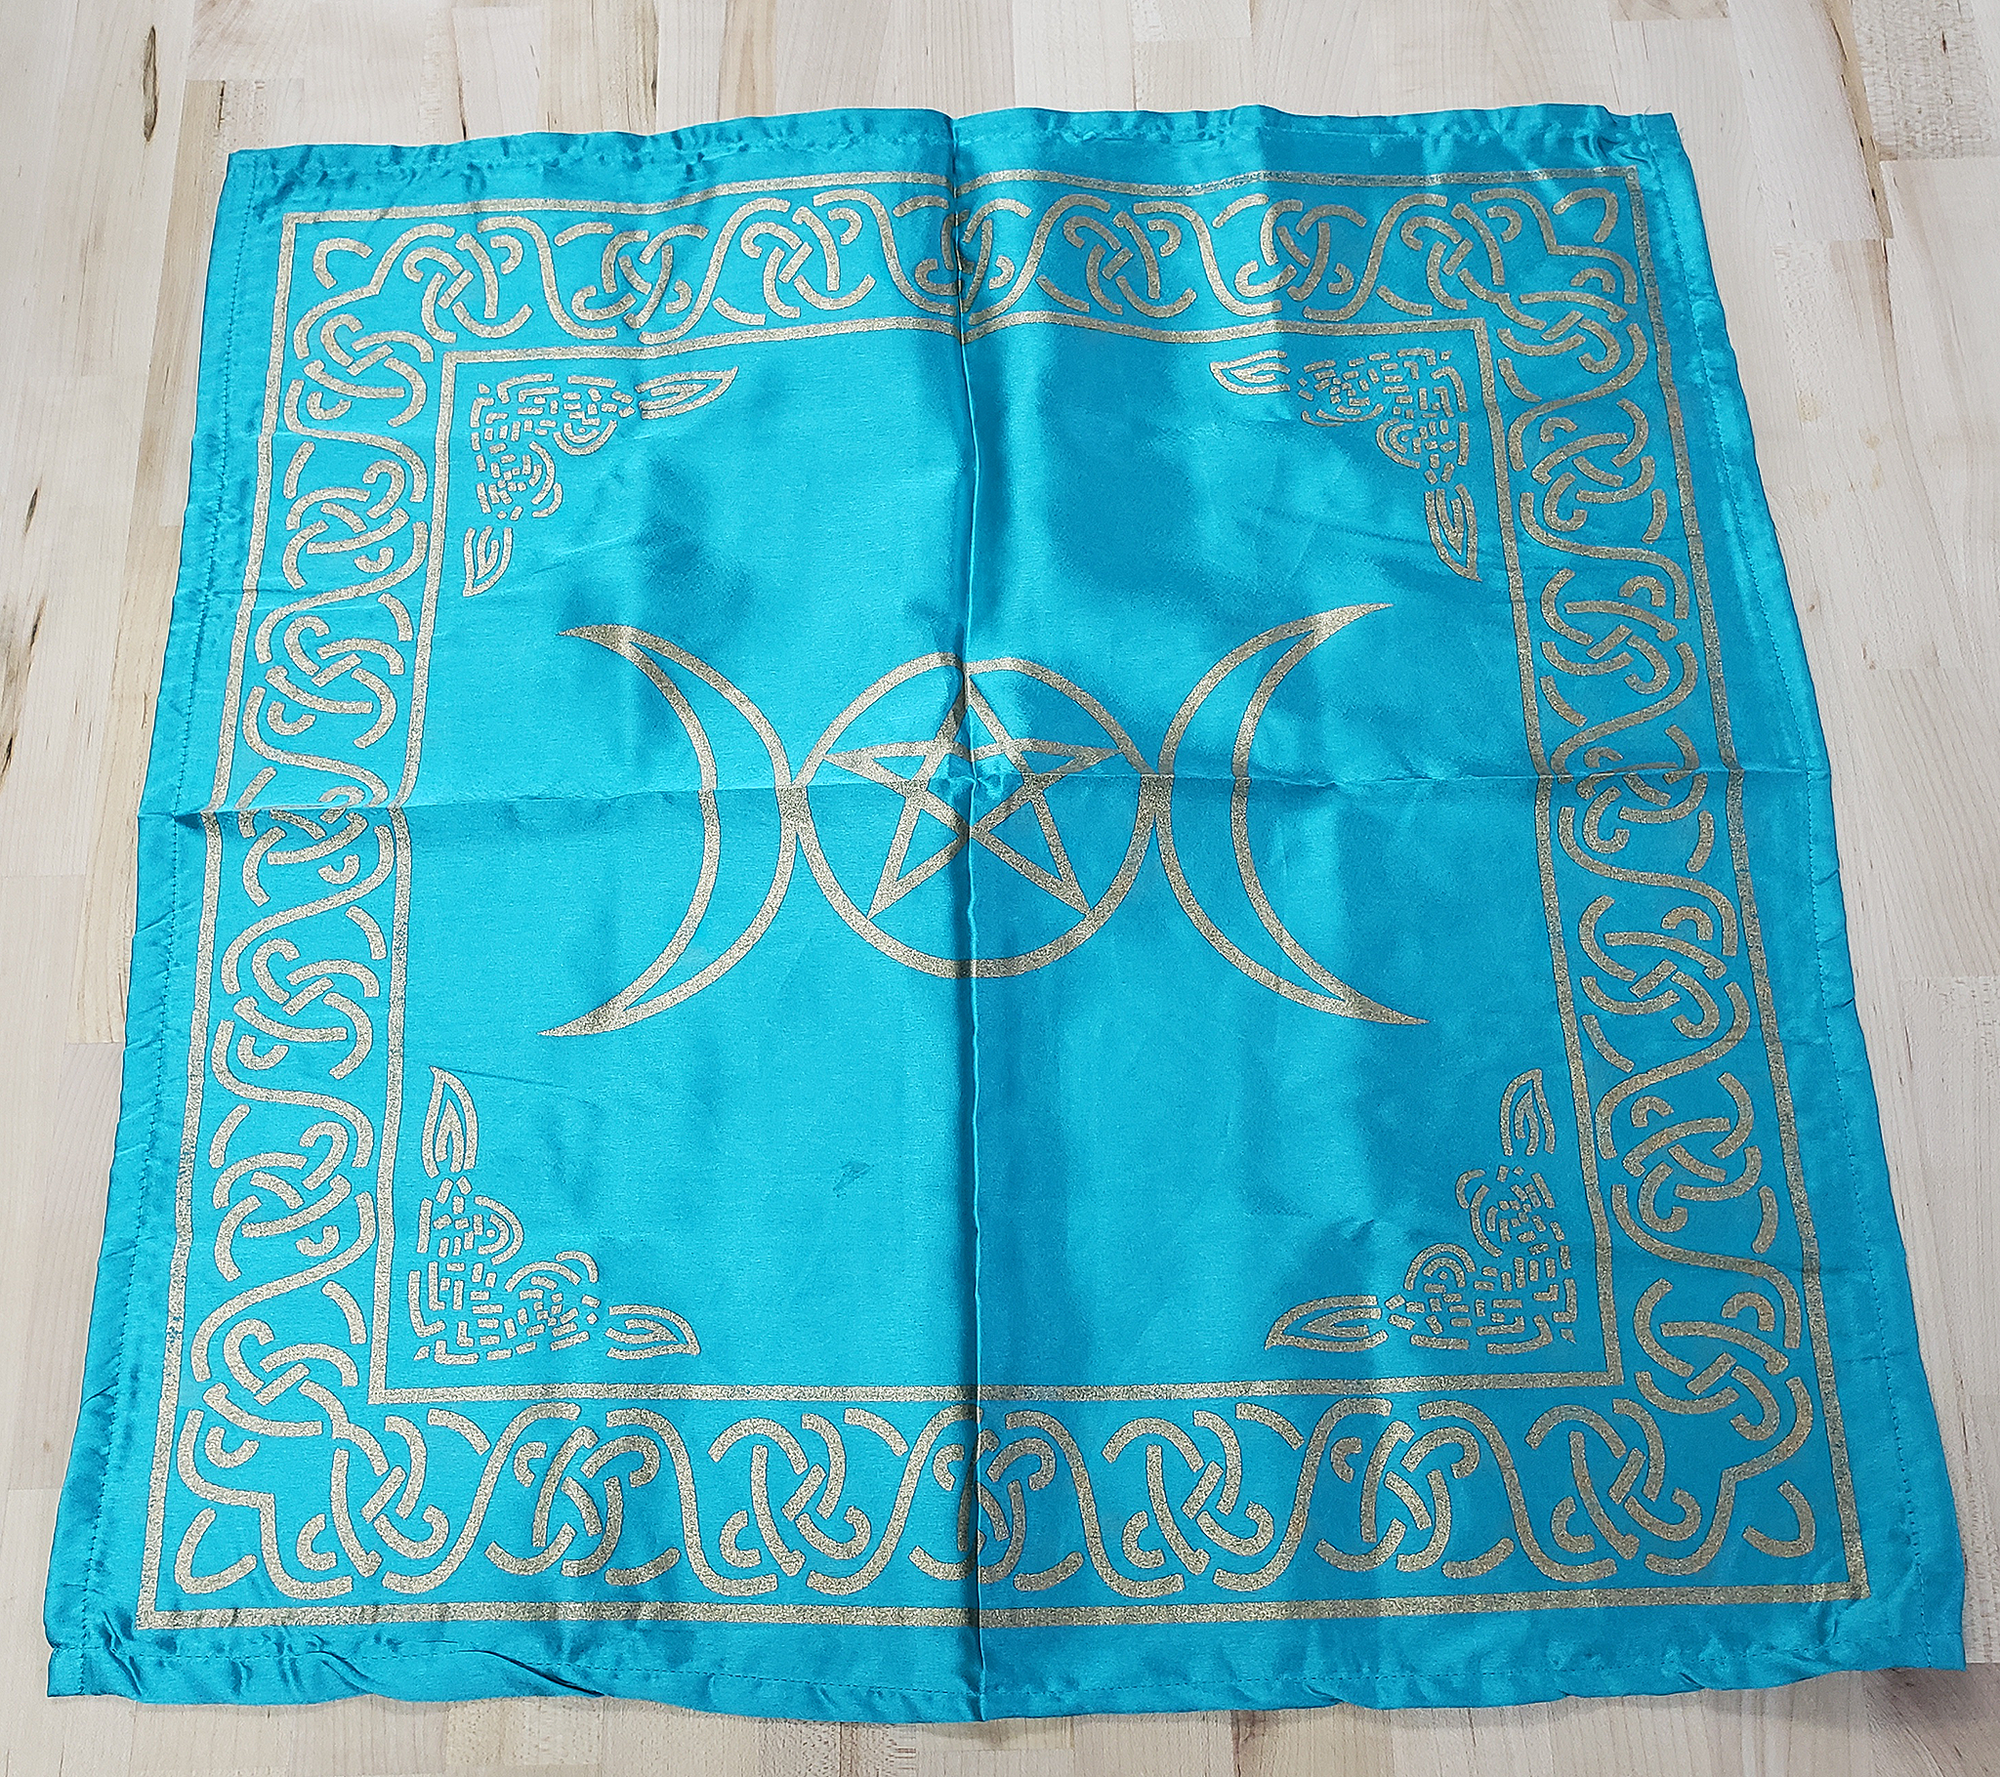 Small Altar Table Cloth - Choose Your Color! - Turquoise Again